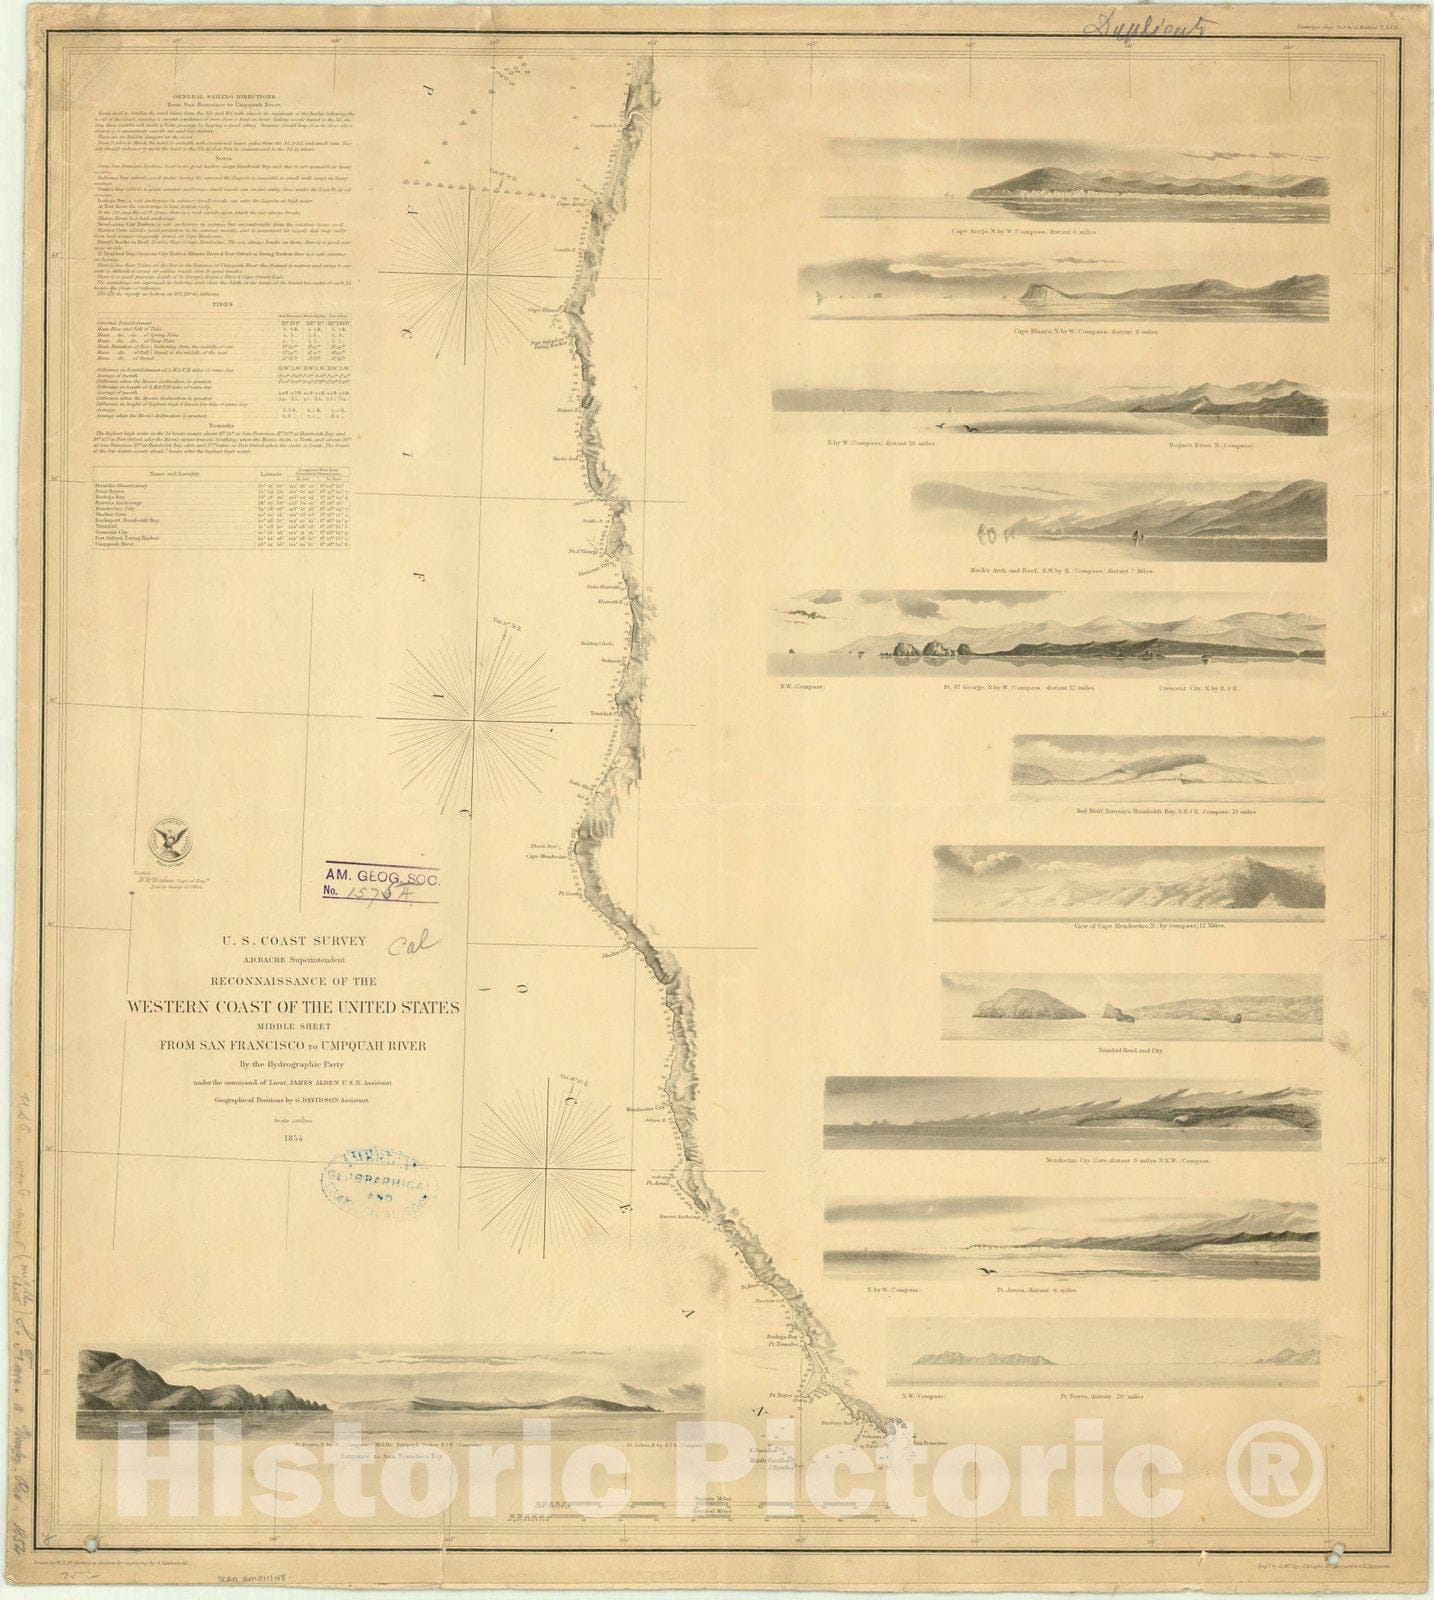 Map : San Francisco, California 1854, Reconnaissance of the western coast of the United States : middle sheet : from San Francisco to Umpquah [sic.] River